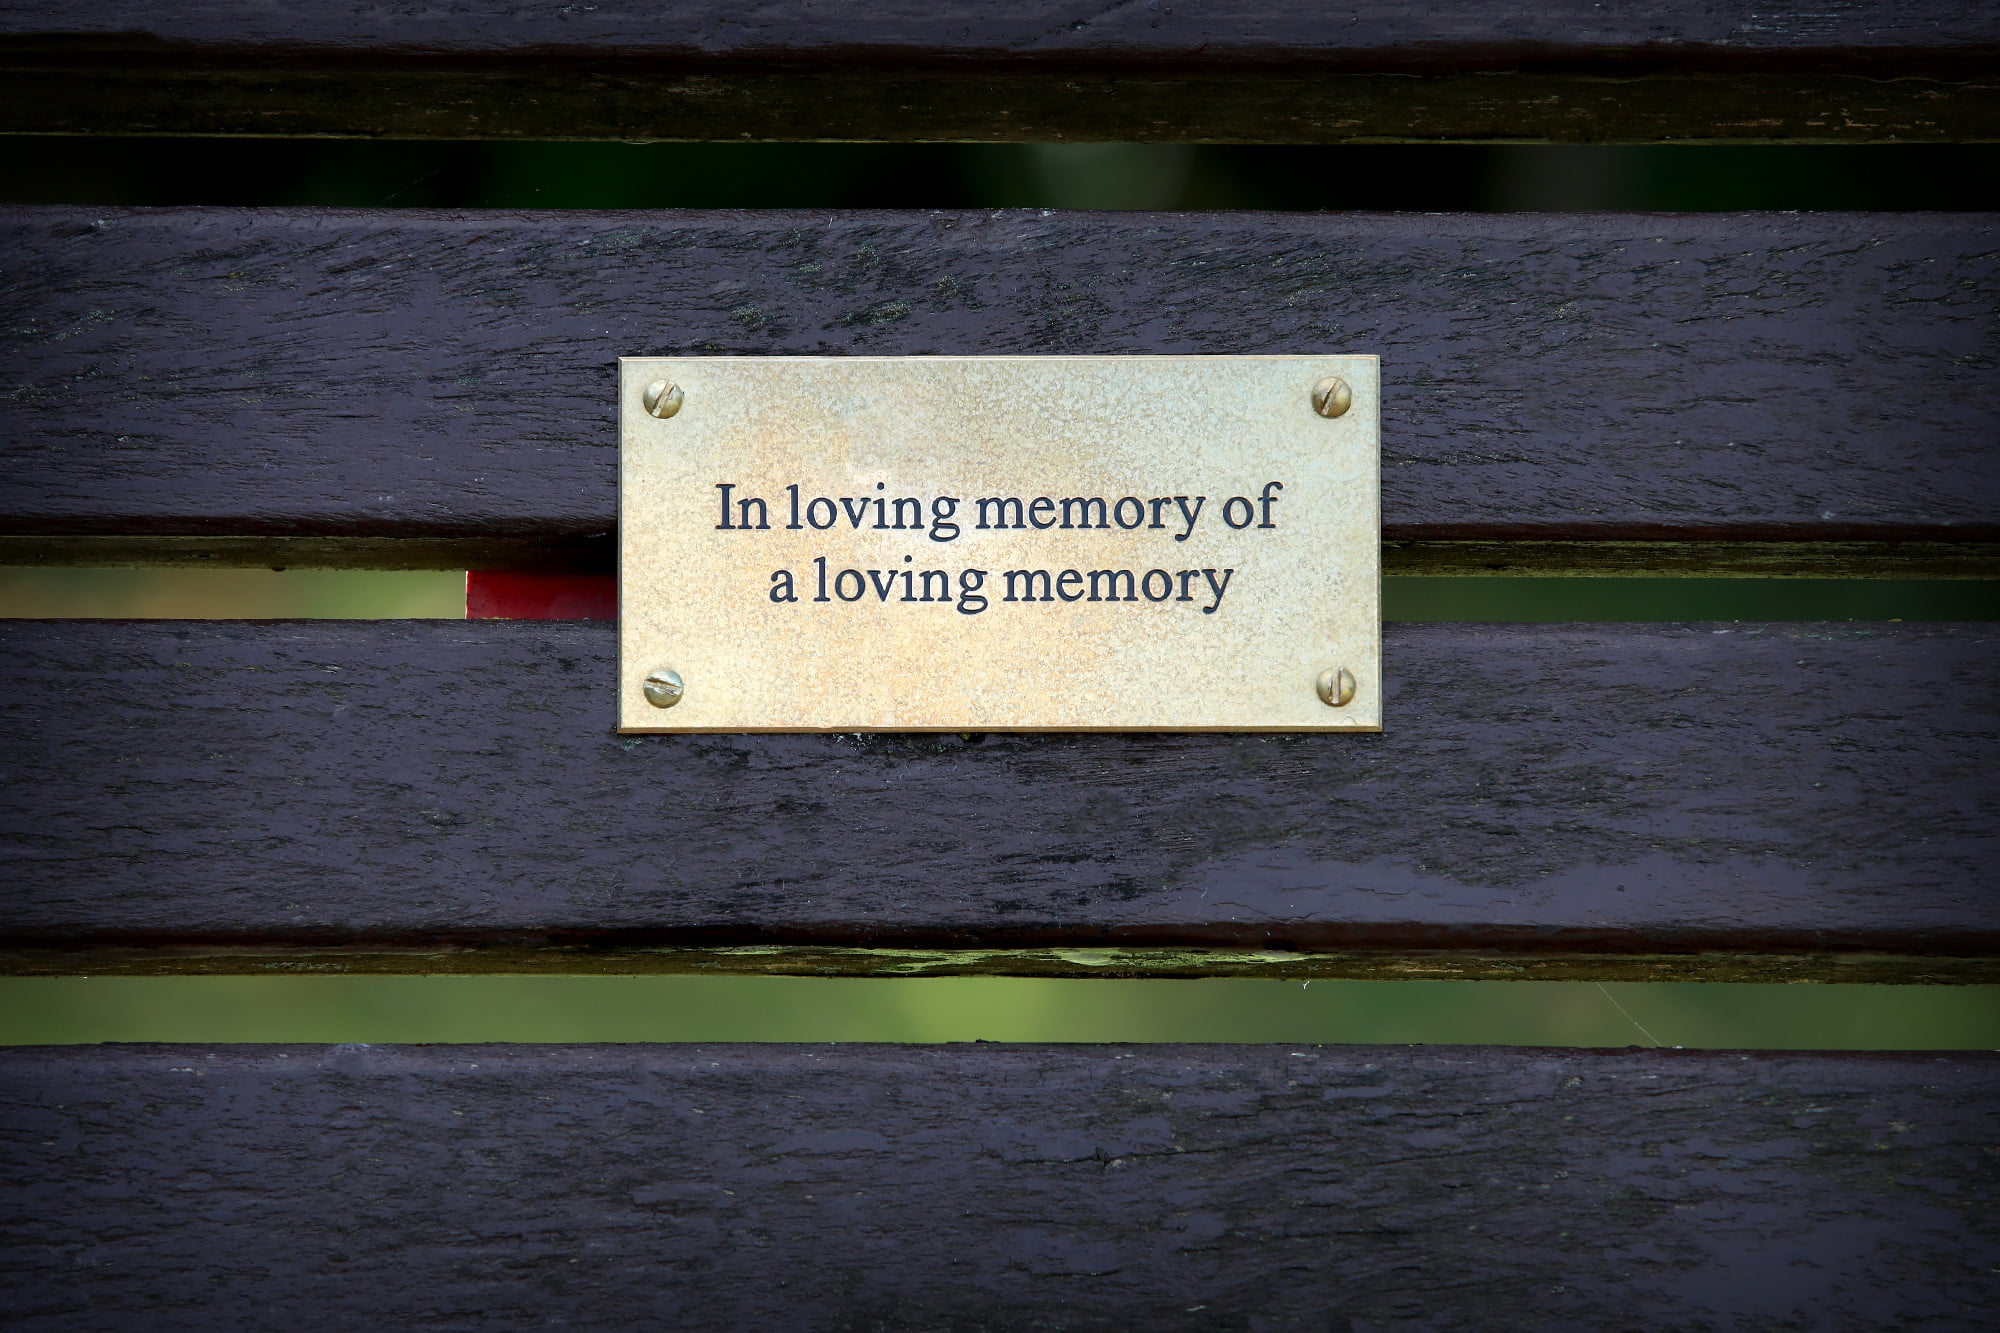 Oliver Bragg's artwork showing a memorial plaque attached to a bench